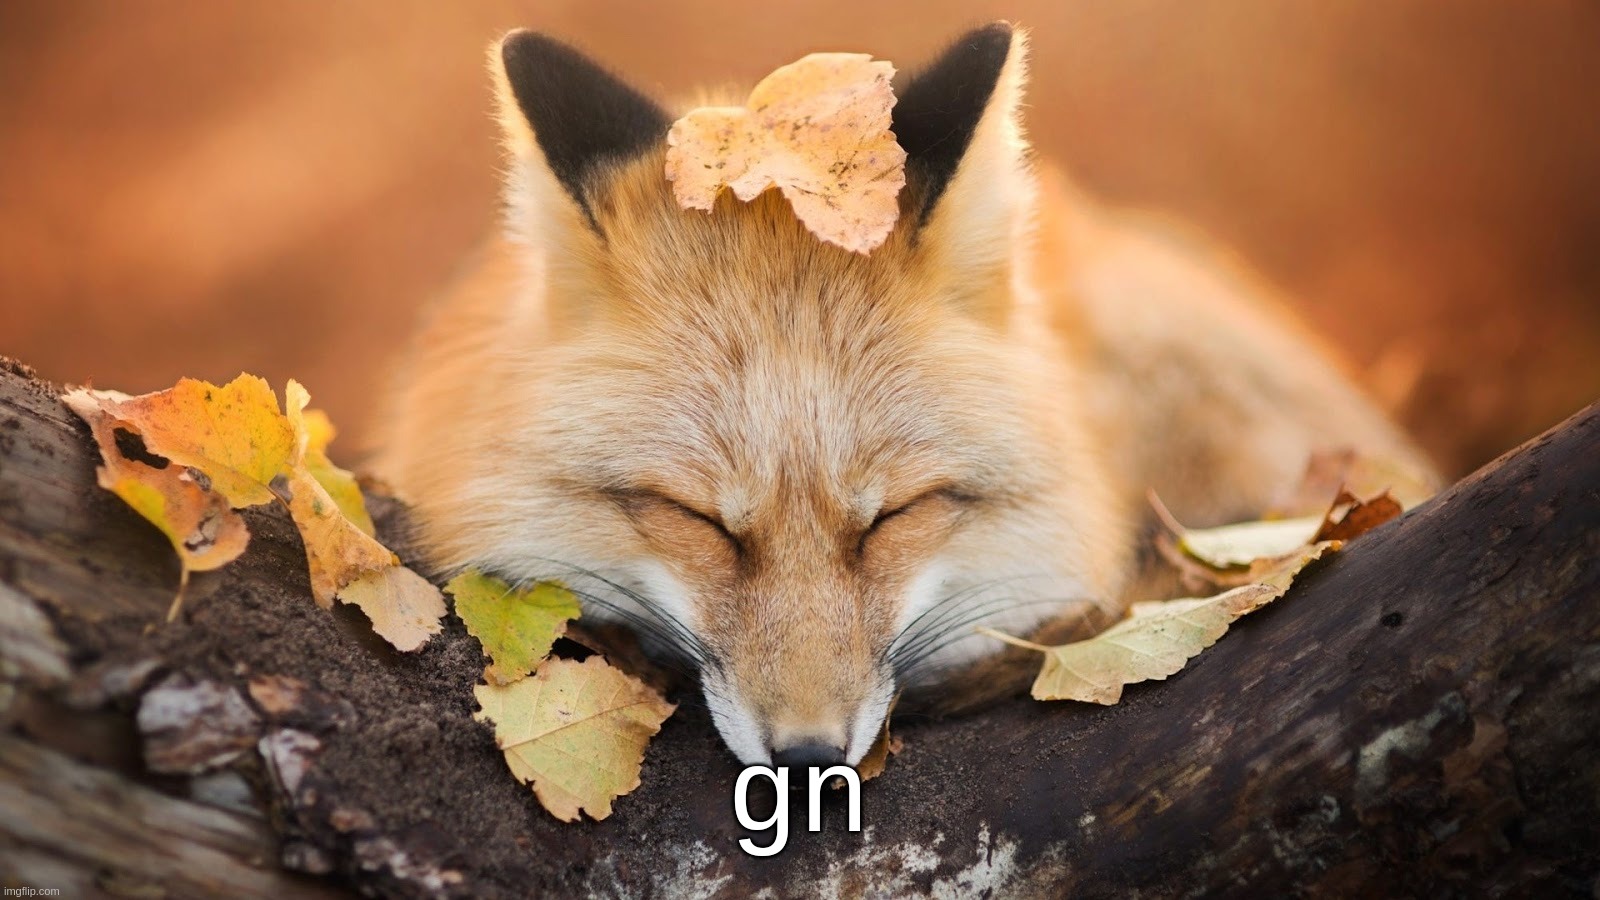 Goodnight | gn | image tagged in goodnight | made w/ Imgflip meme maker